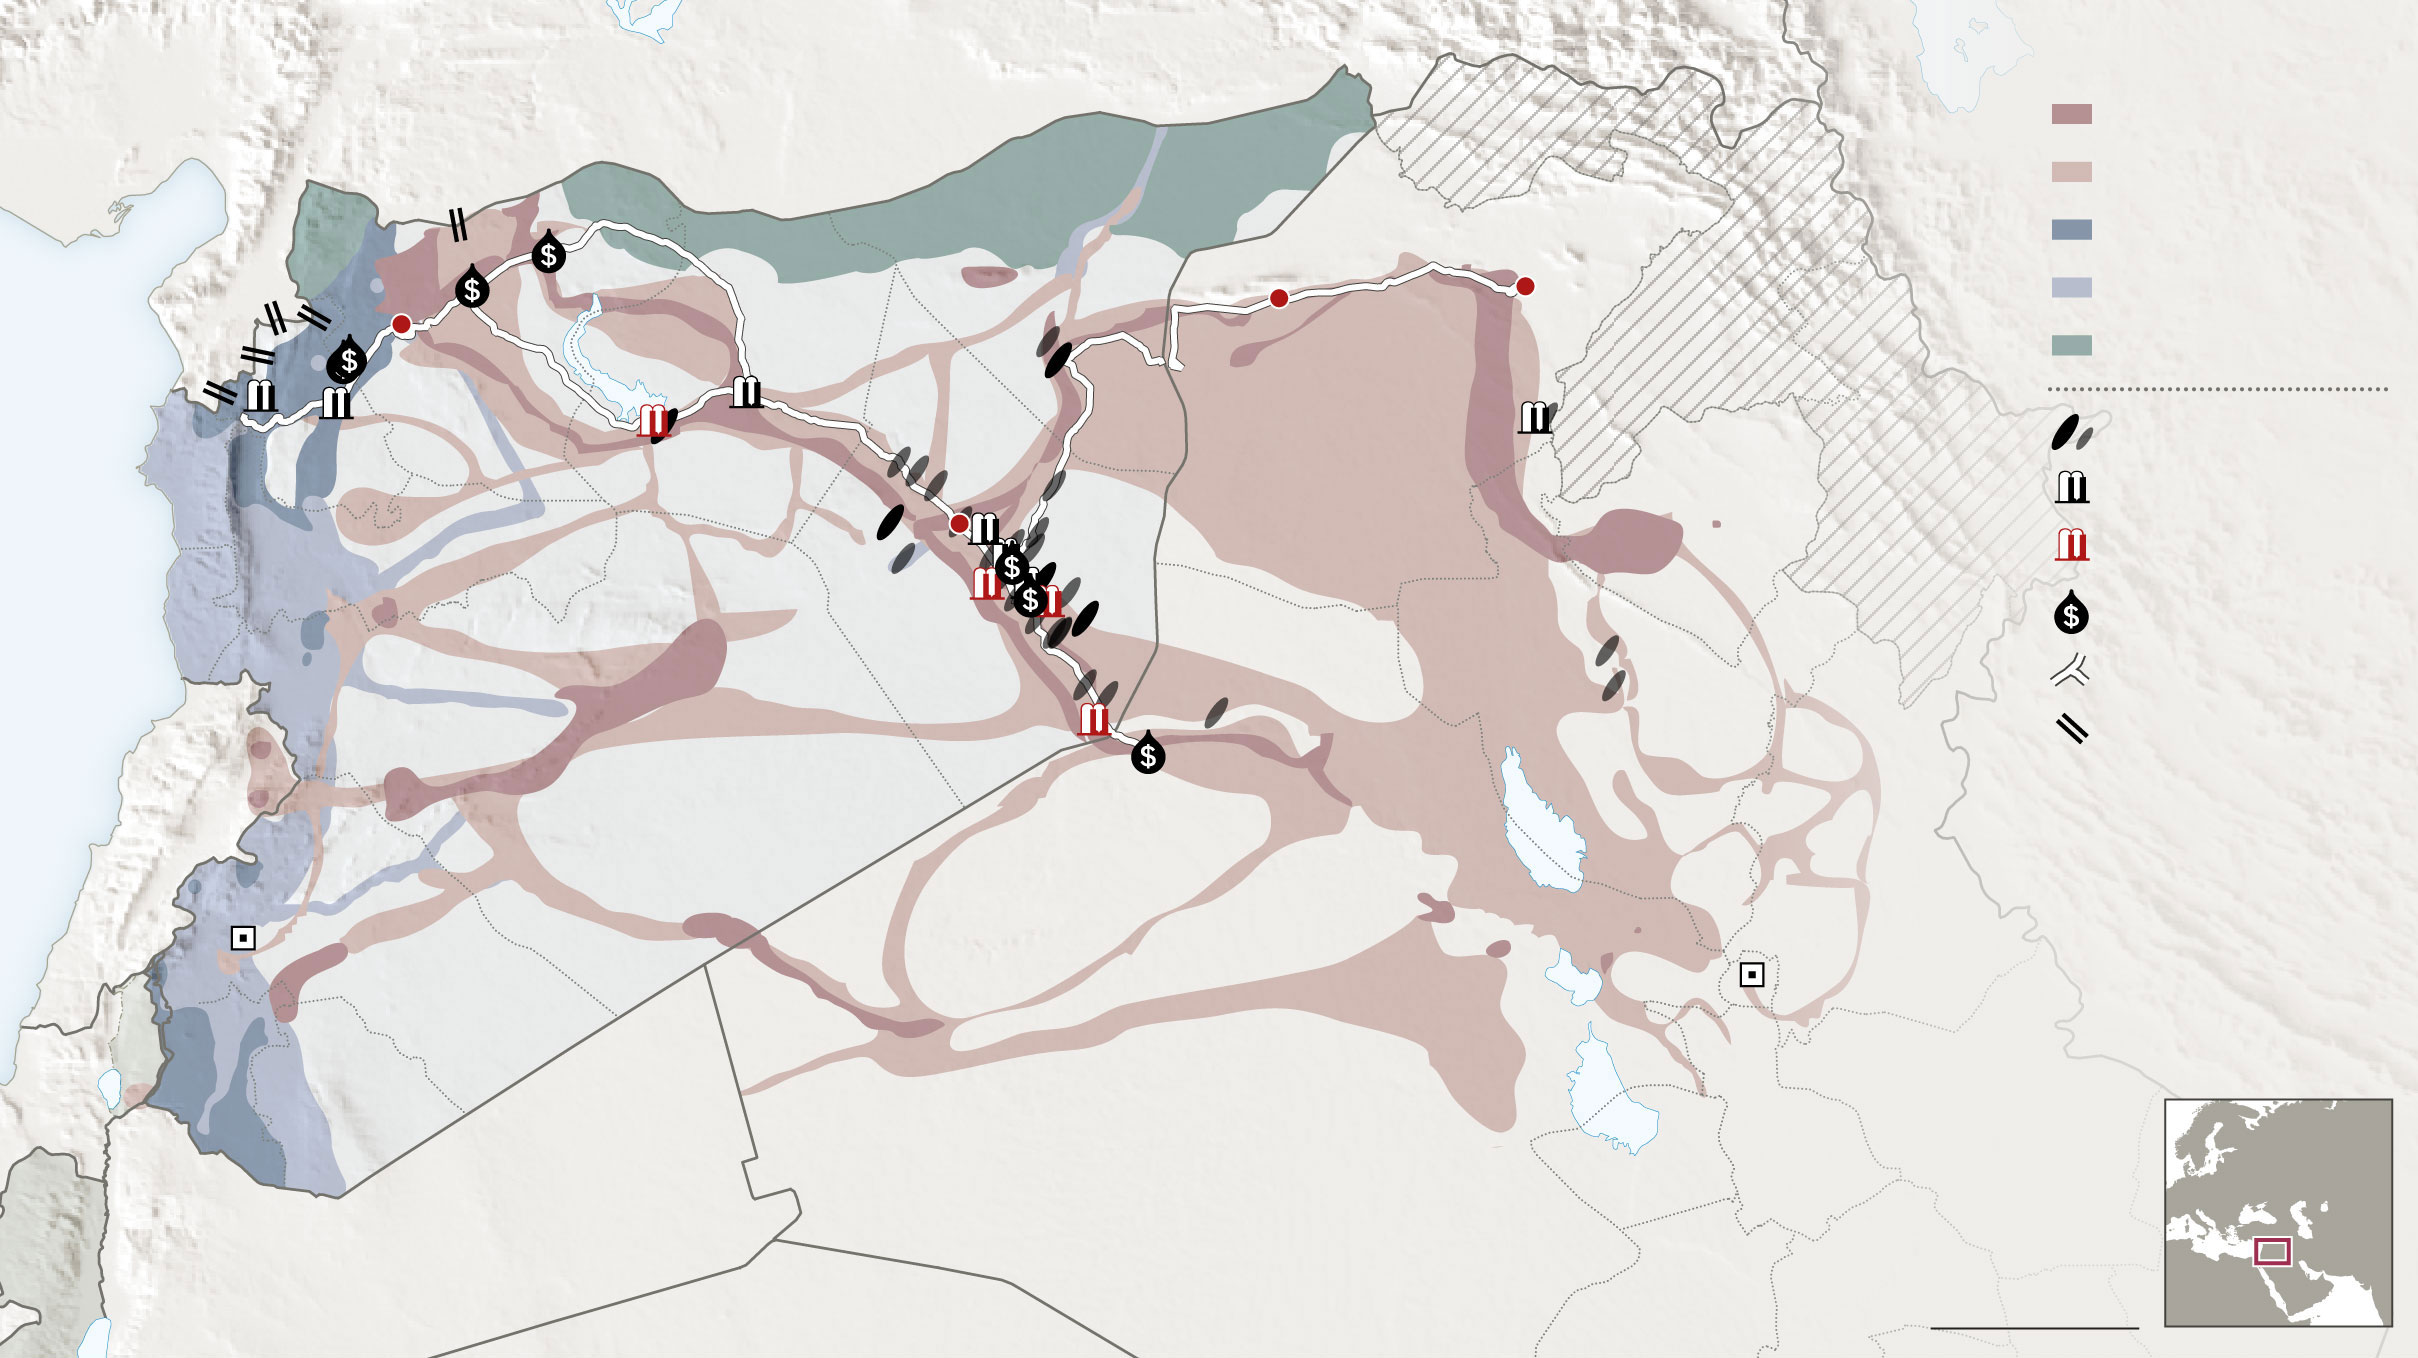 http://ig.ft.com/sites/2015/isis-oil/images/main-map-lxl-1210b.jpg